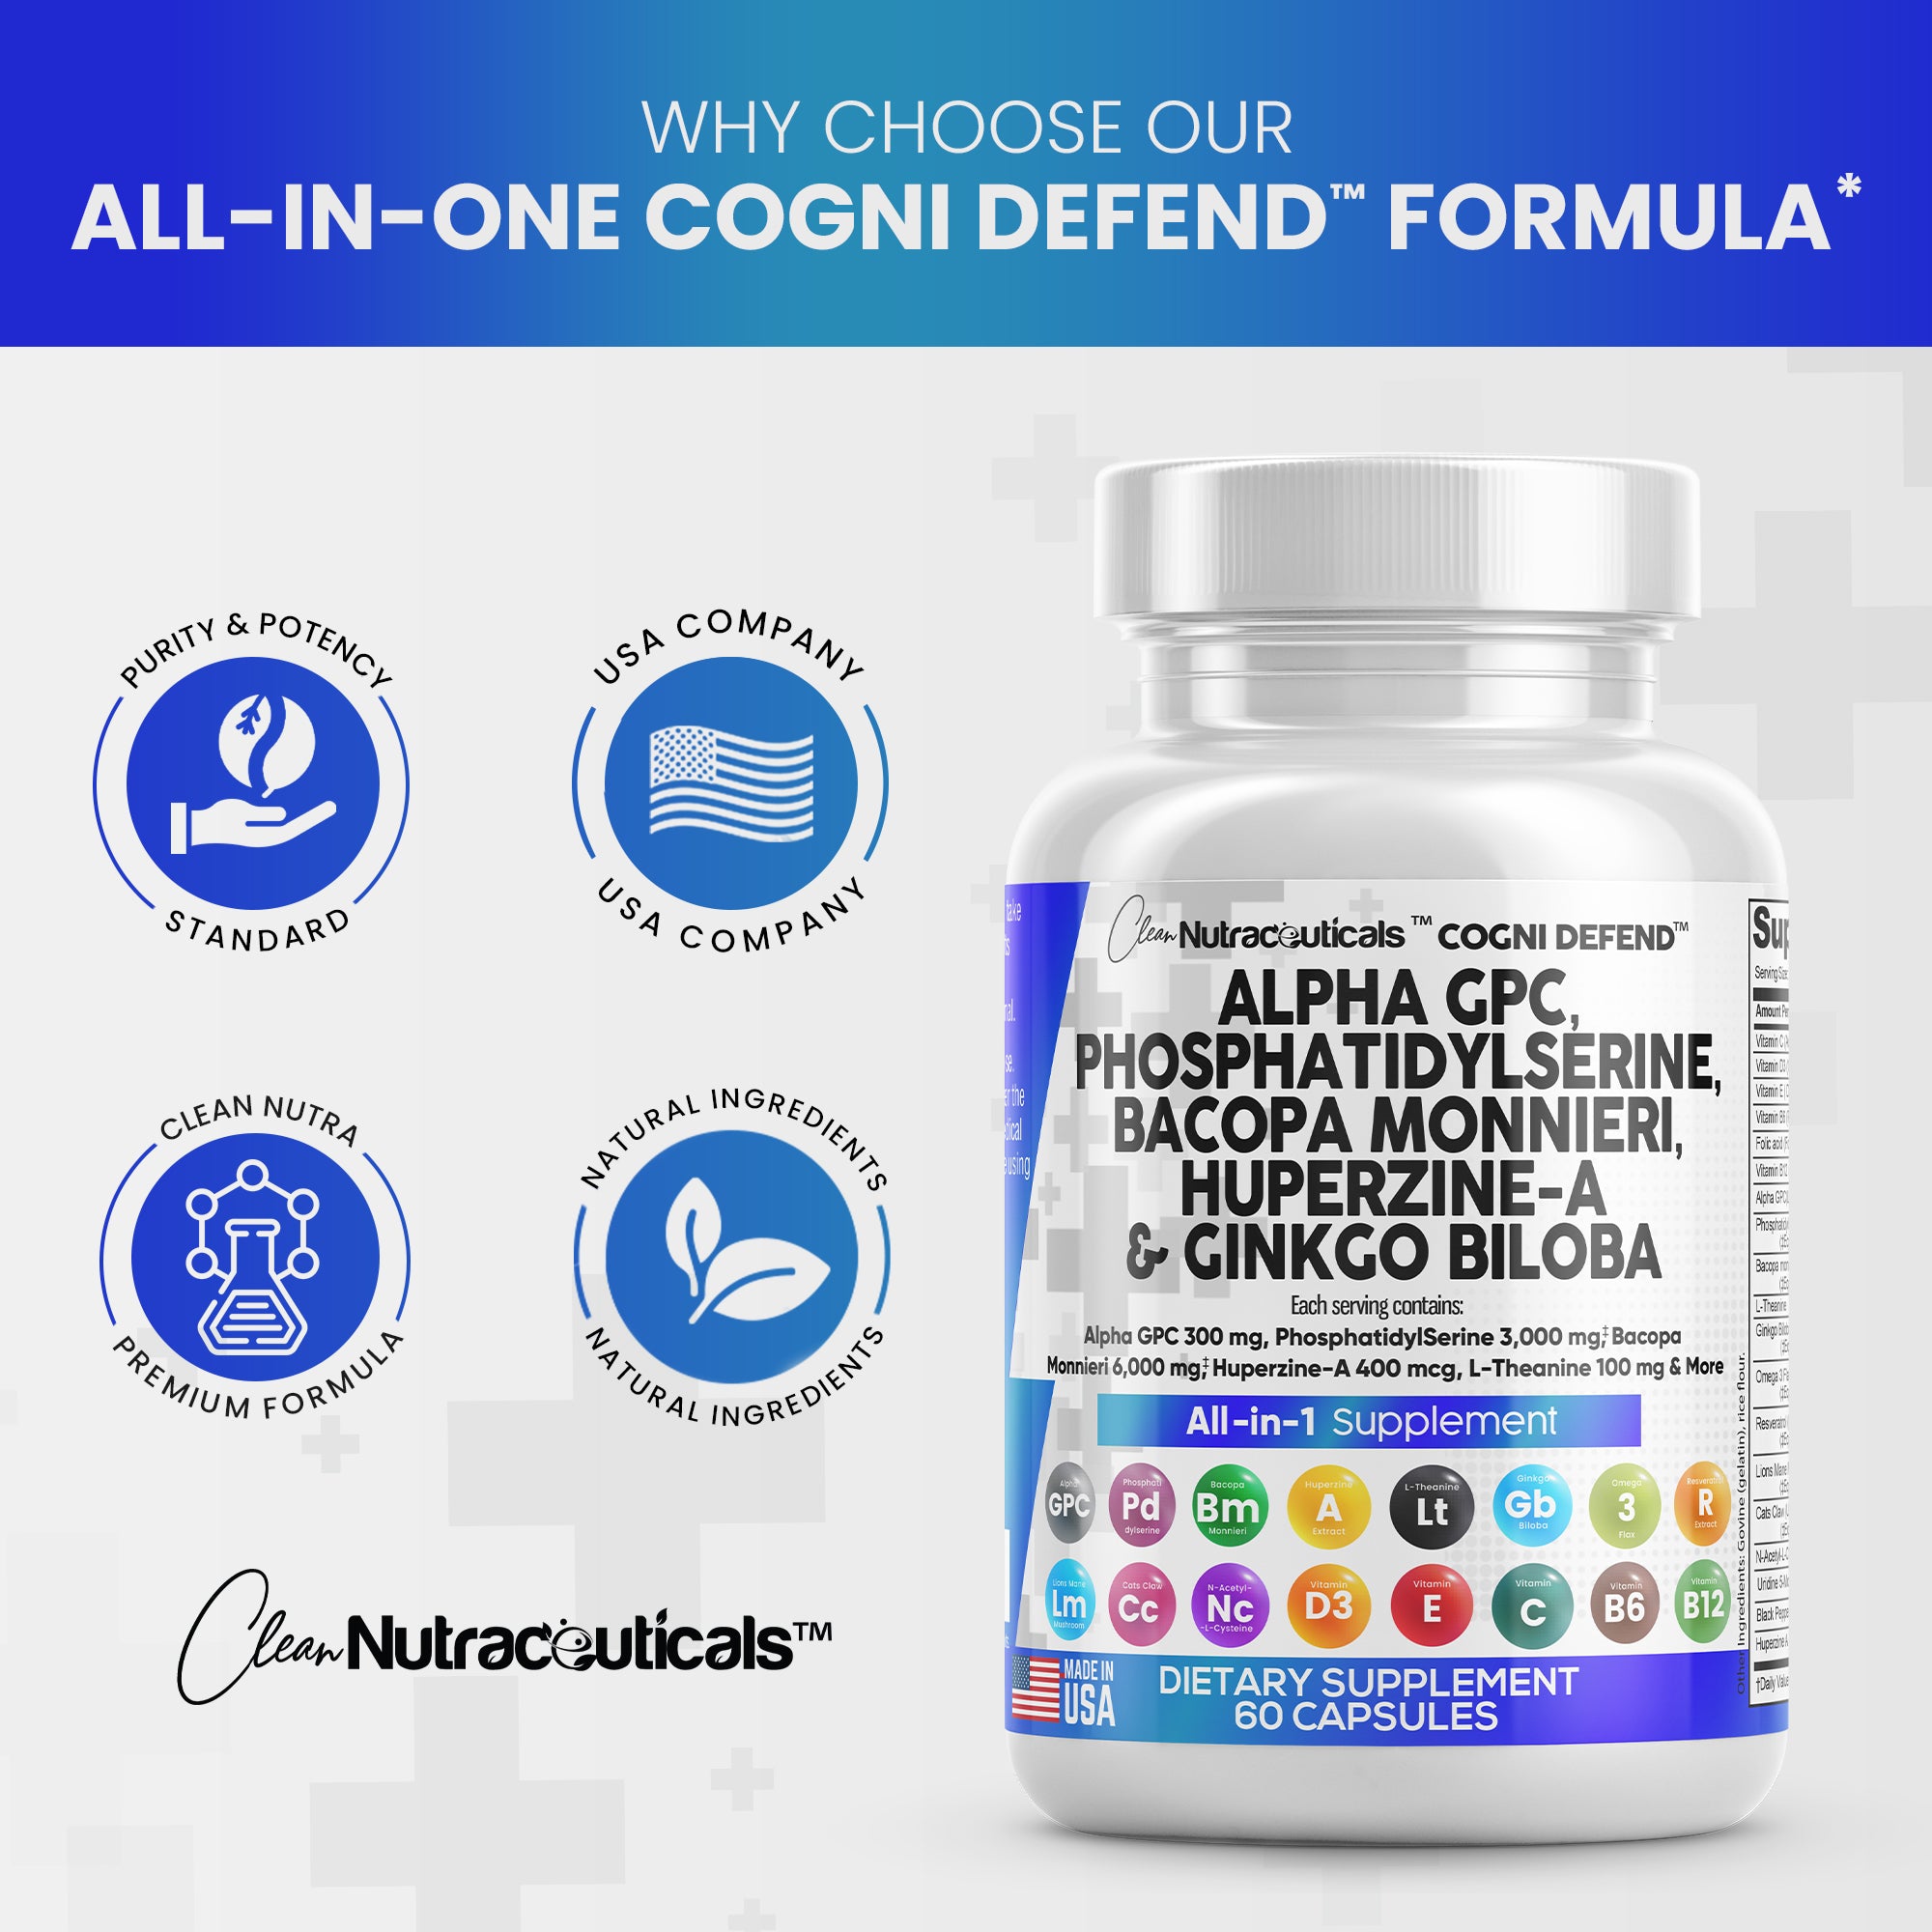 All In One Cogni-Defend